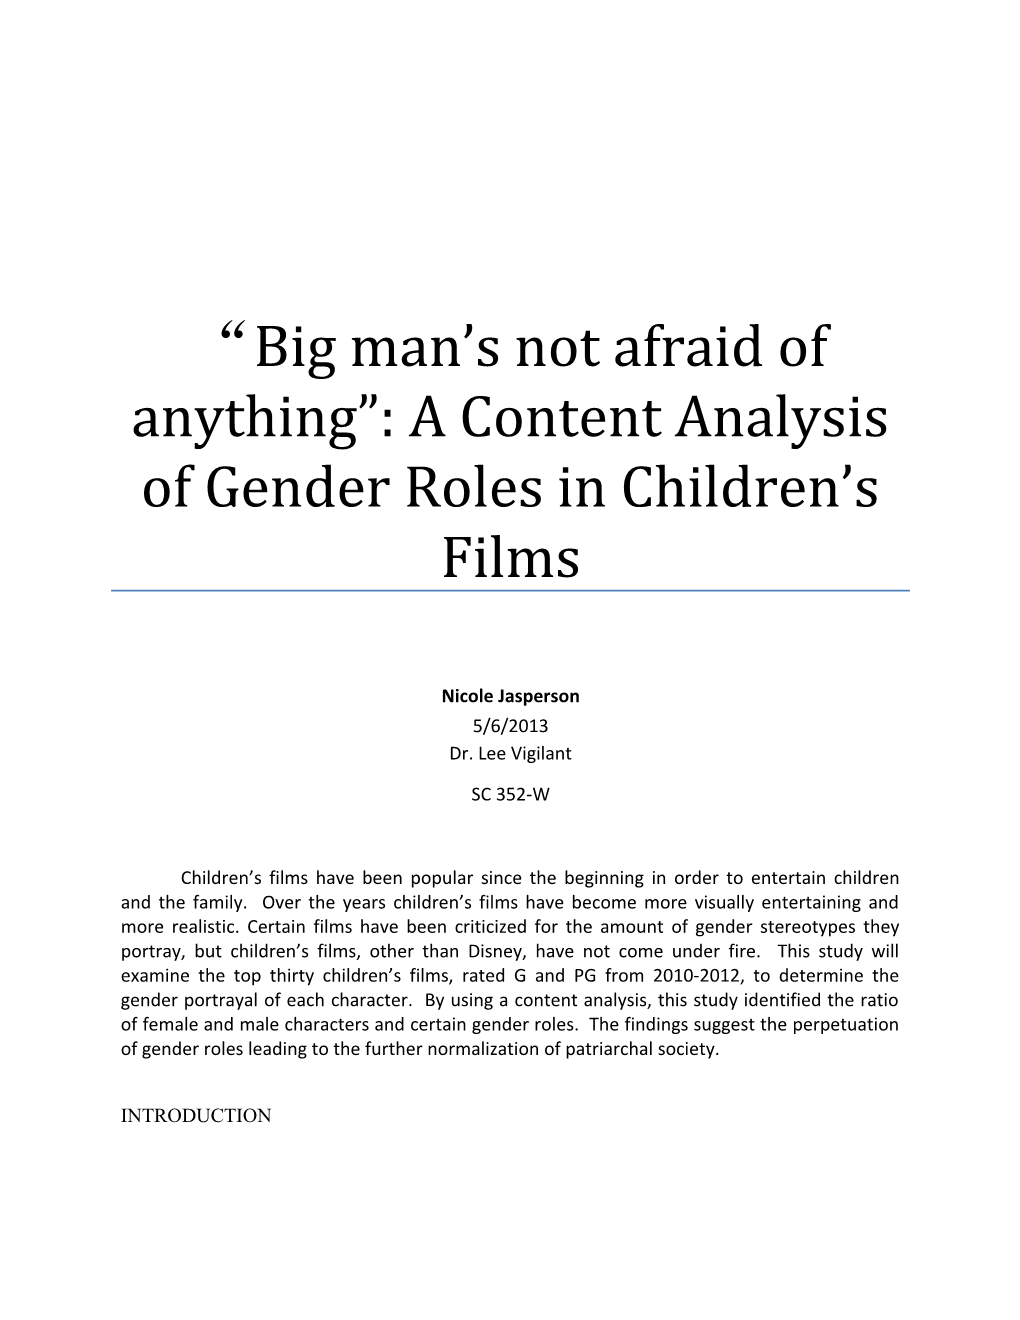 Big Man S Not Afraid of Anything : a Content Analysis of Gender Roles in Children S Films